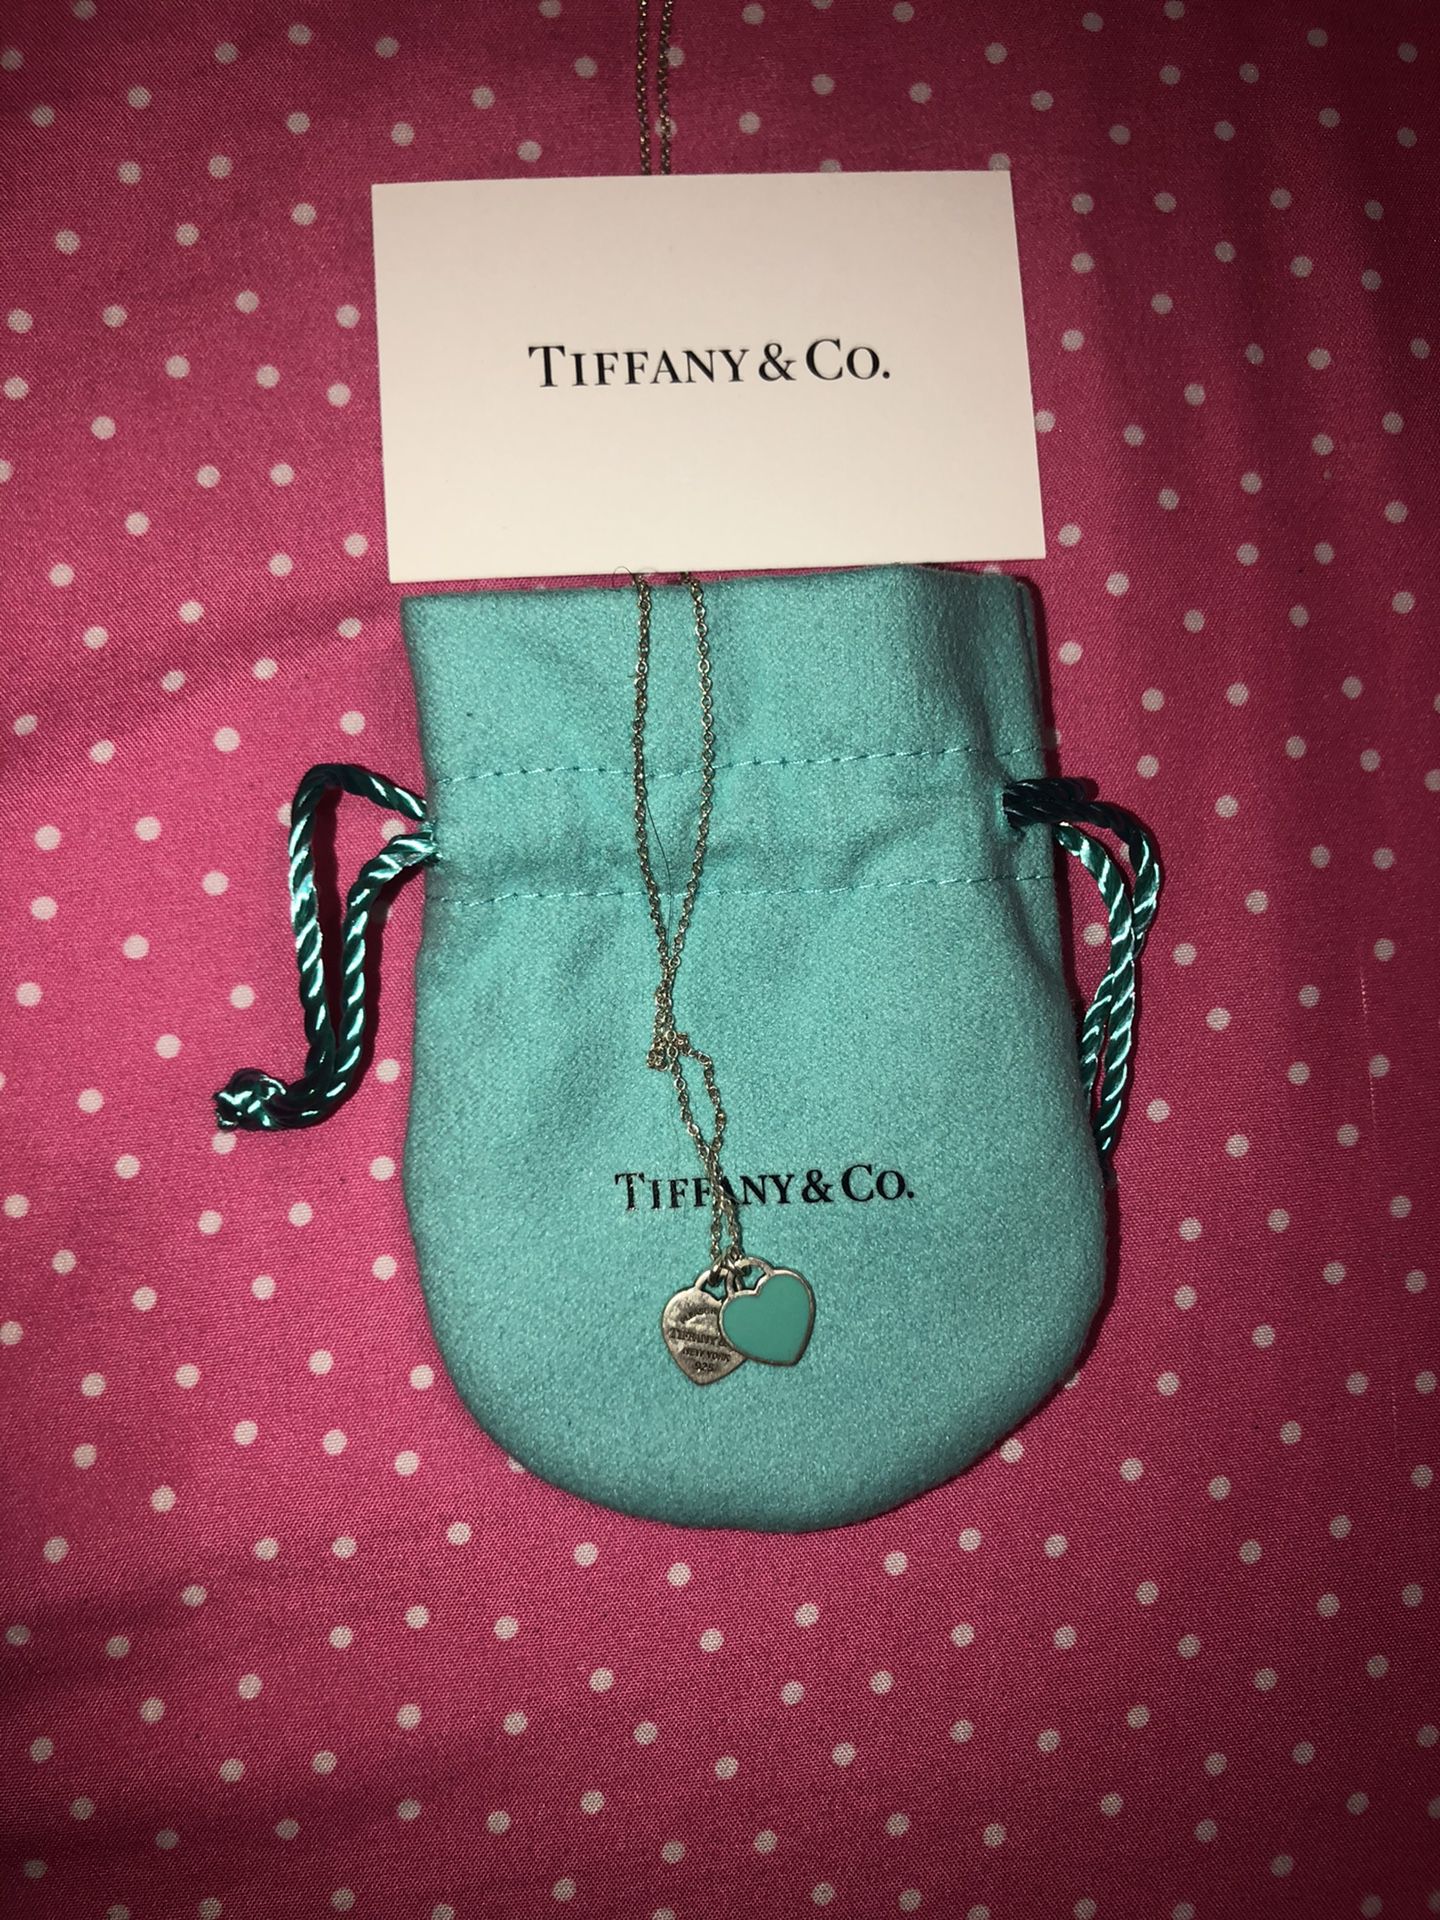 Tiffany & Co. Necklace listed price or best offer